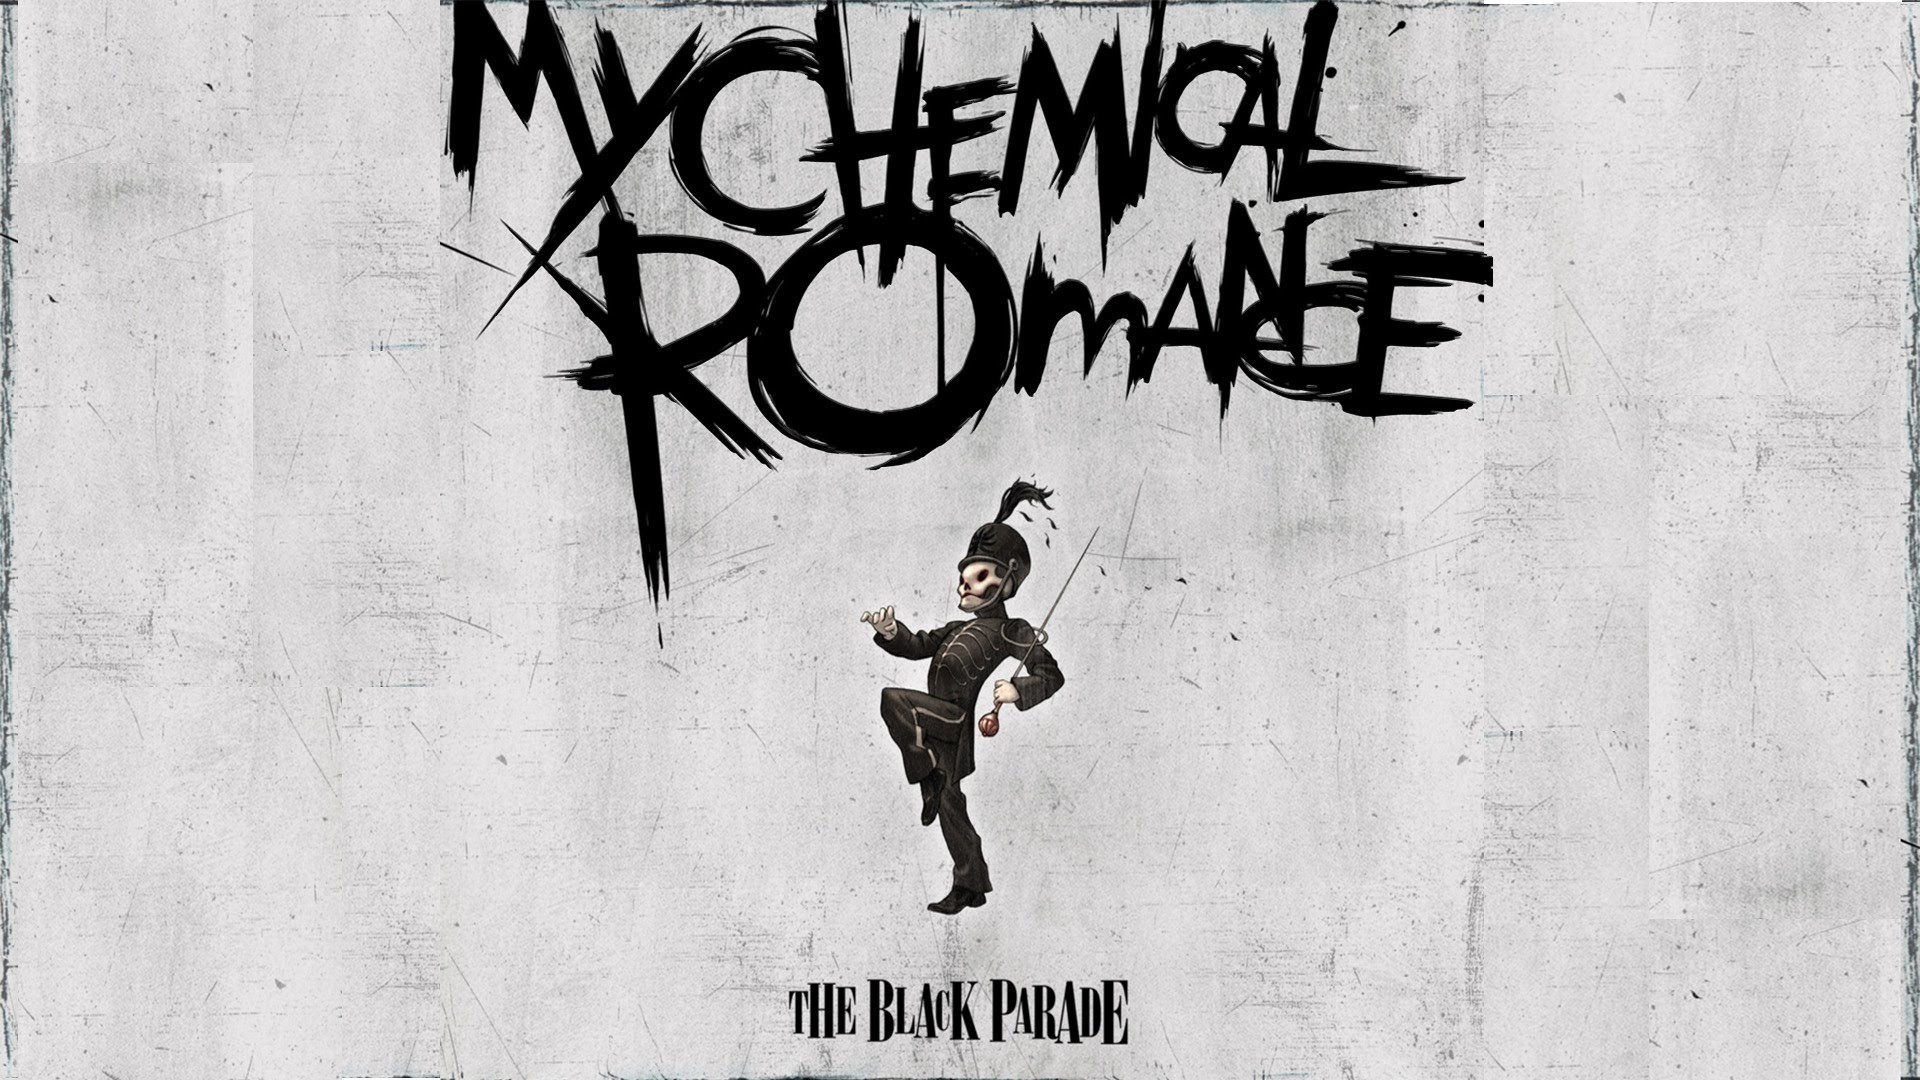 1920x1080 Vinyl of the Week: The Black Parade by My Chemical Romance